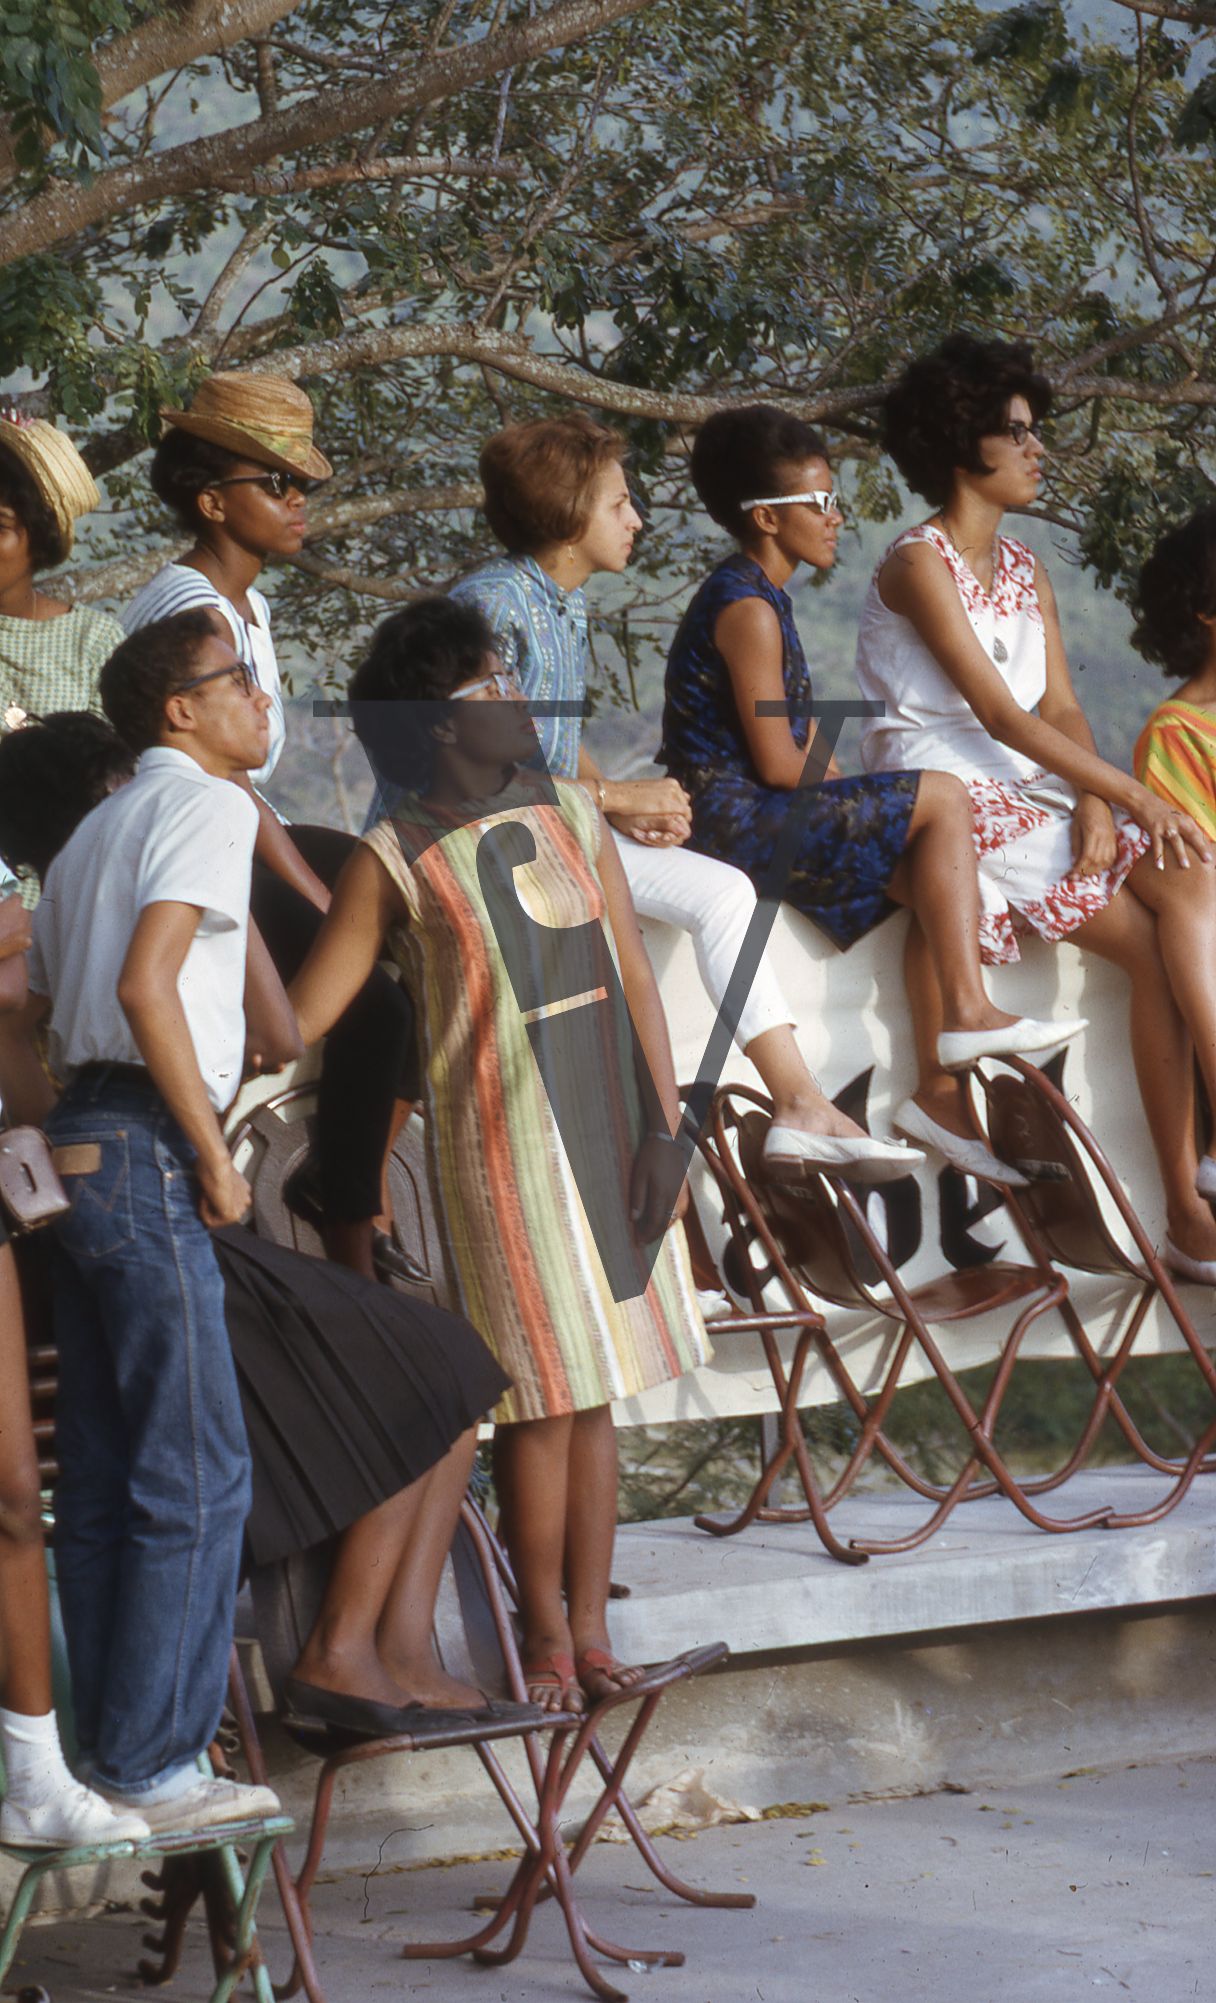 Jamaica, Group watching on in 60s fashions.